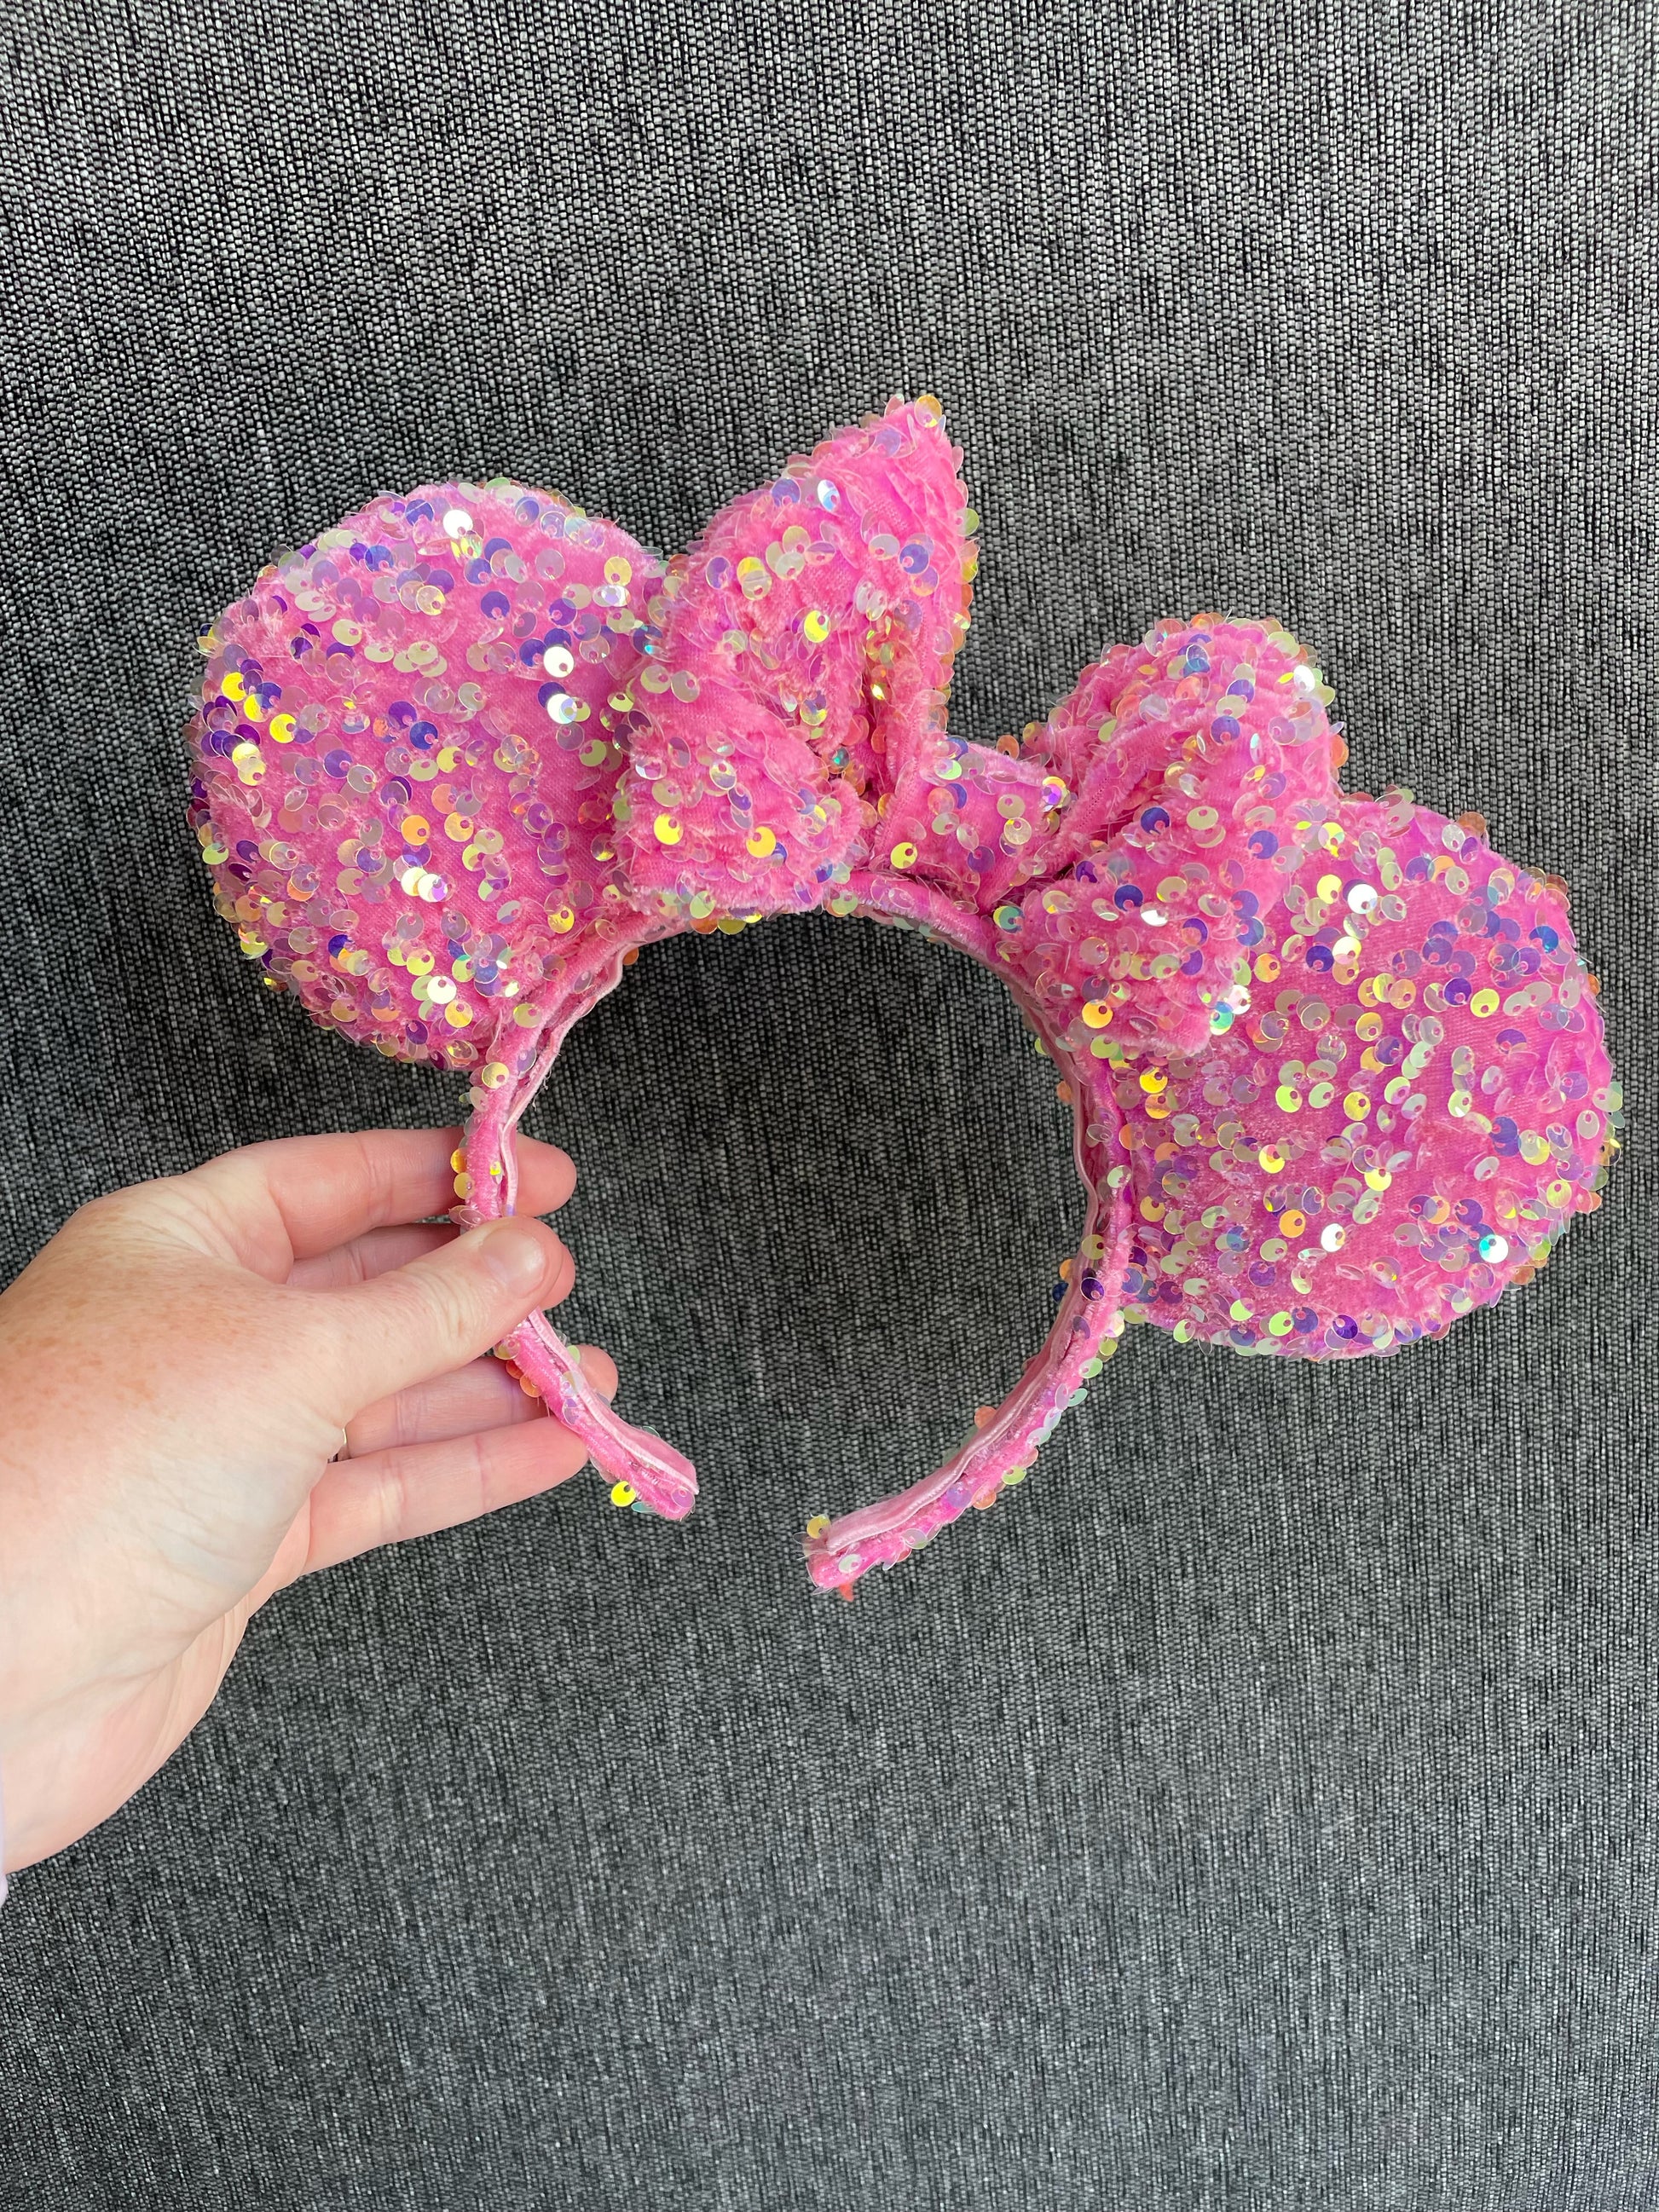 Disney Minnie Mouse Sequin Ears with Sequin Bow, Pink